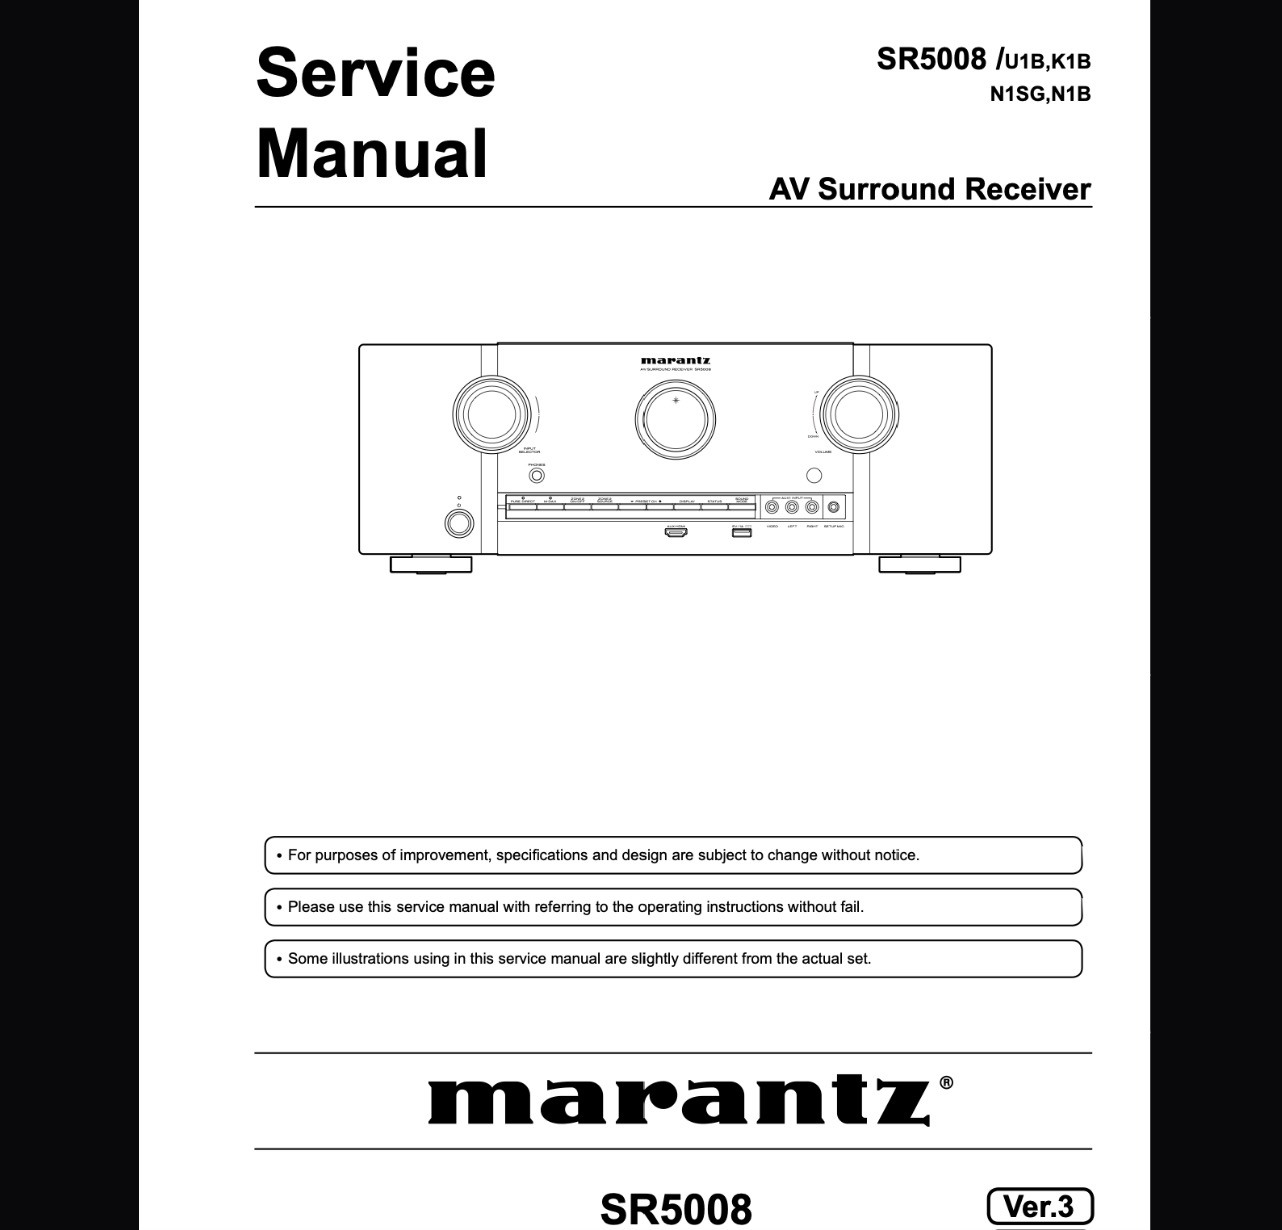 Marantz SR5008 Surround Receiver Service Manual, Parts List, Exploded View, Wiring and Schematic Diagram